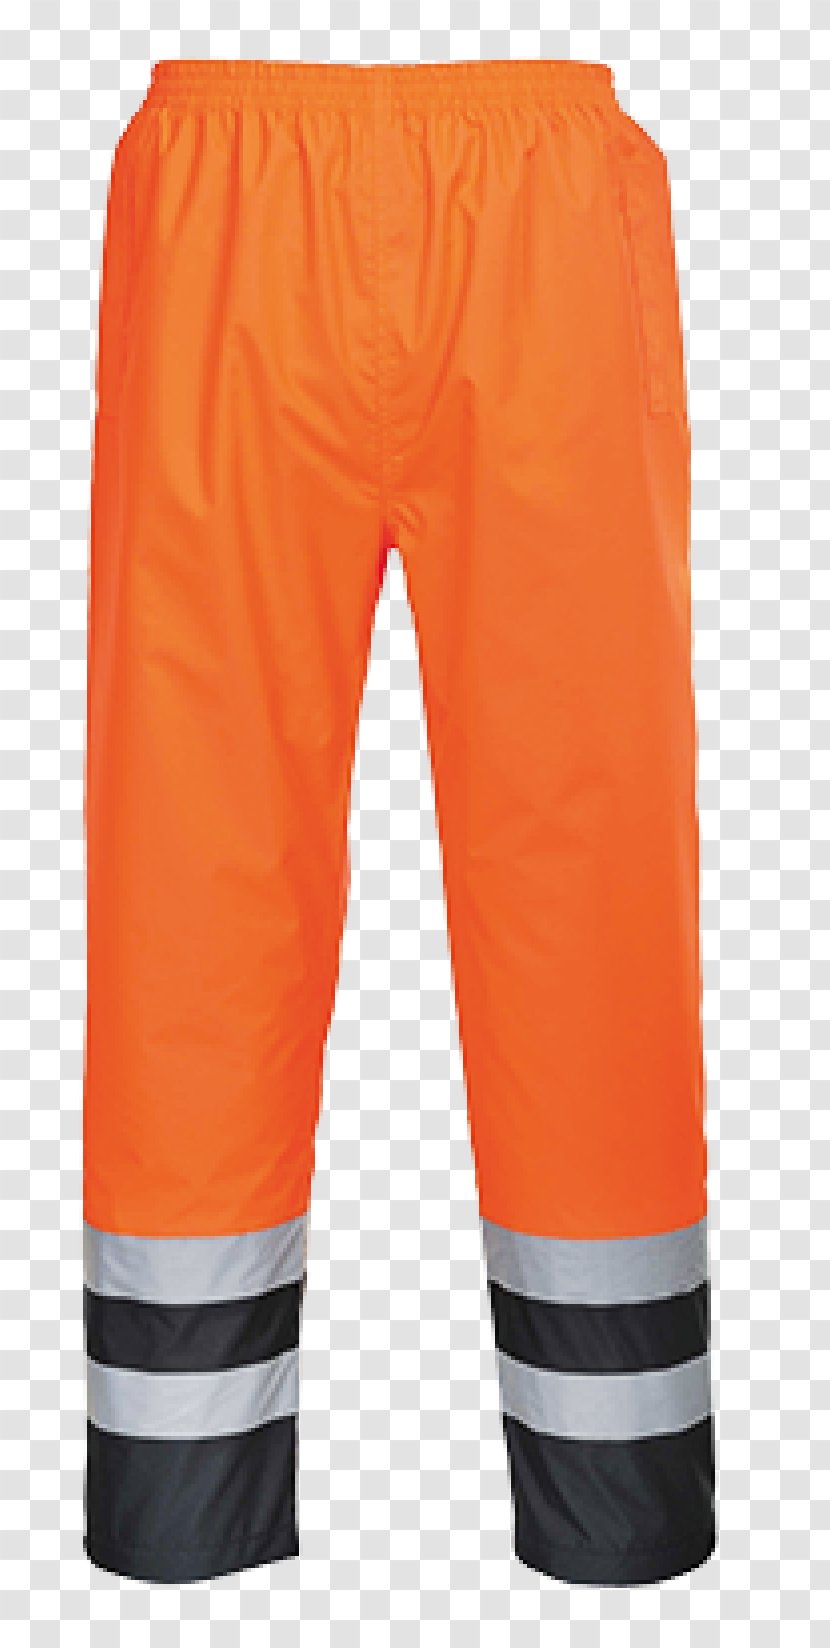 Rain Pants High-visibility Clothing Workwear - Trunks - Trousers Transparent PNG